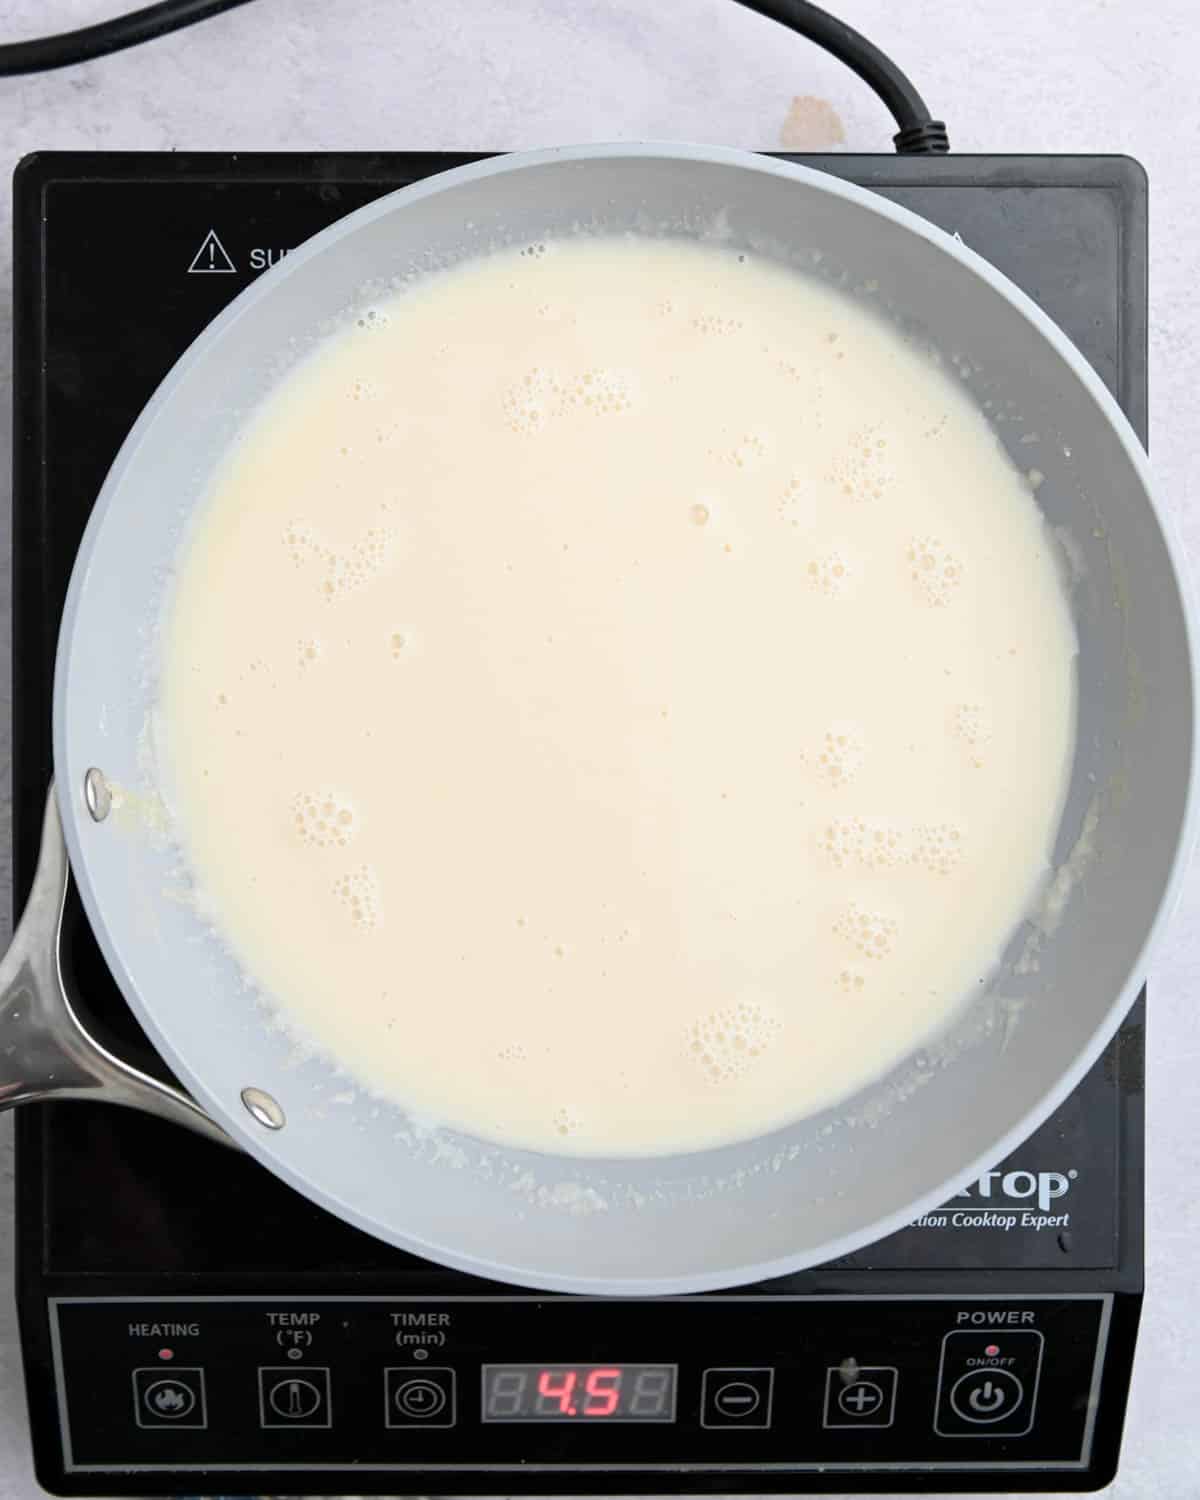 Creamy sauce in a gray skillet.